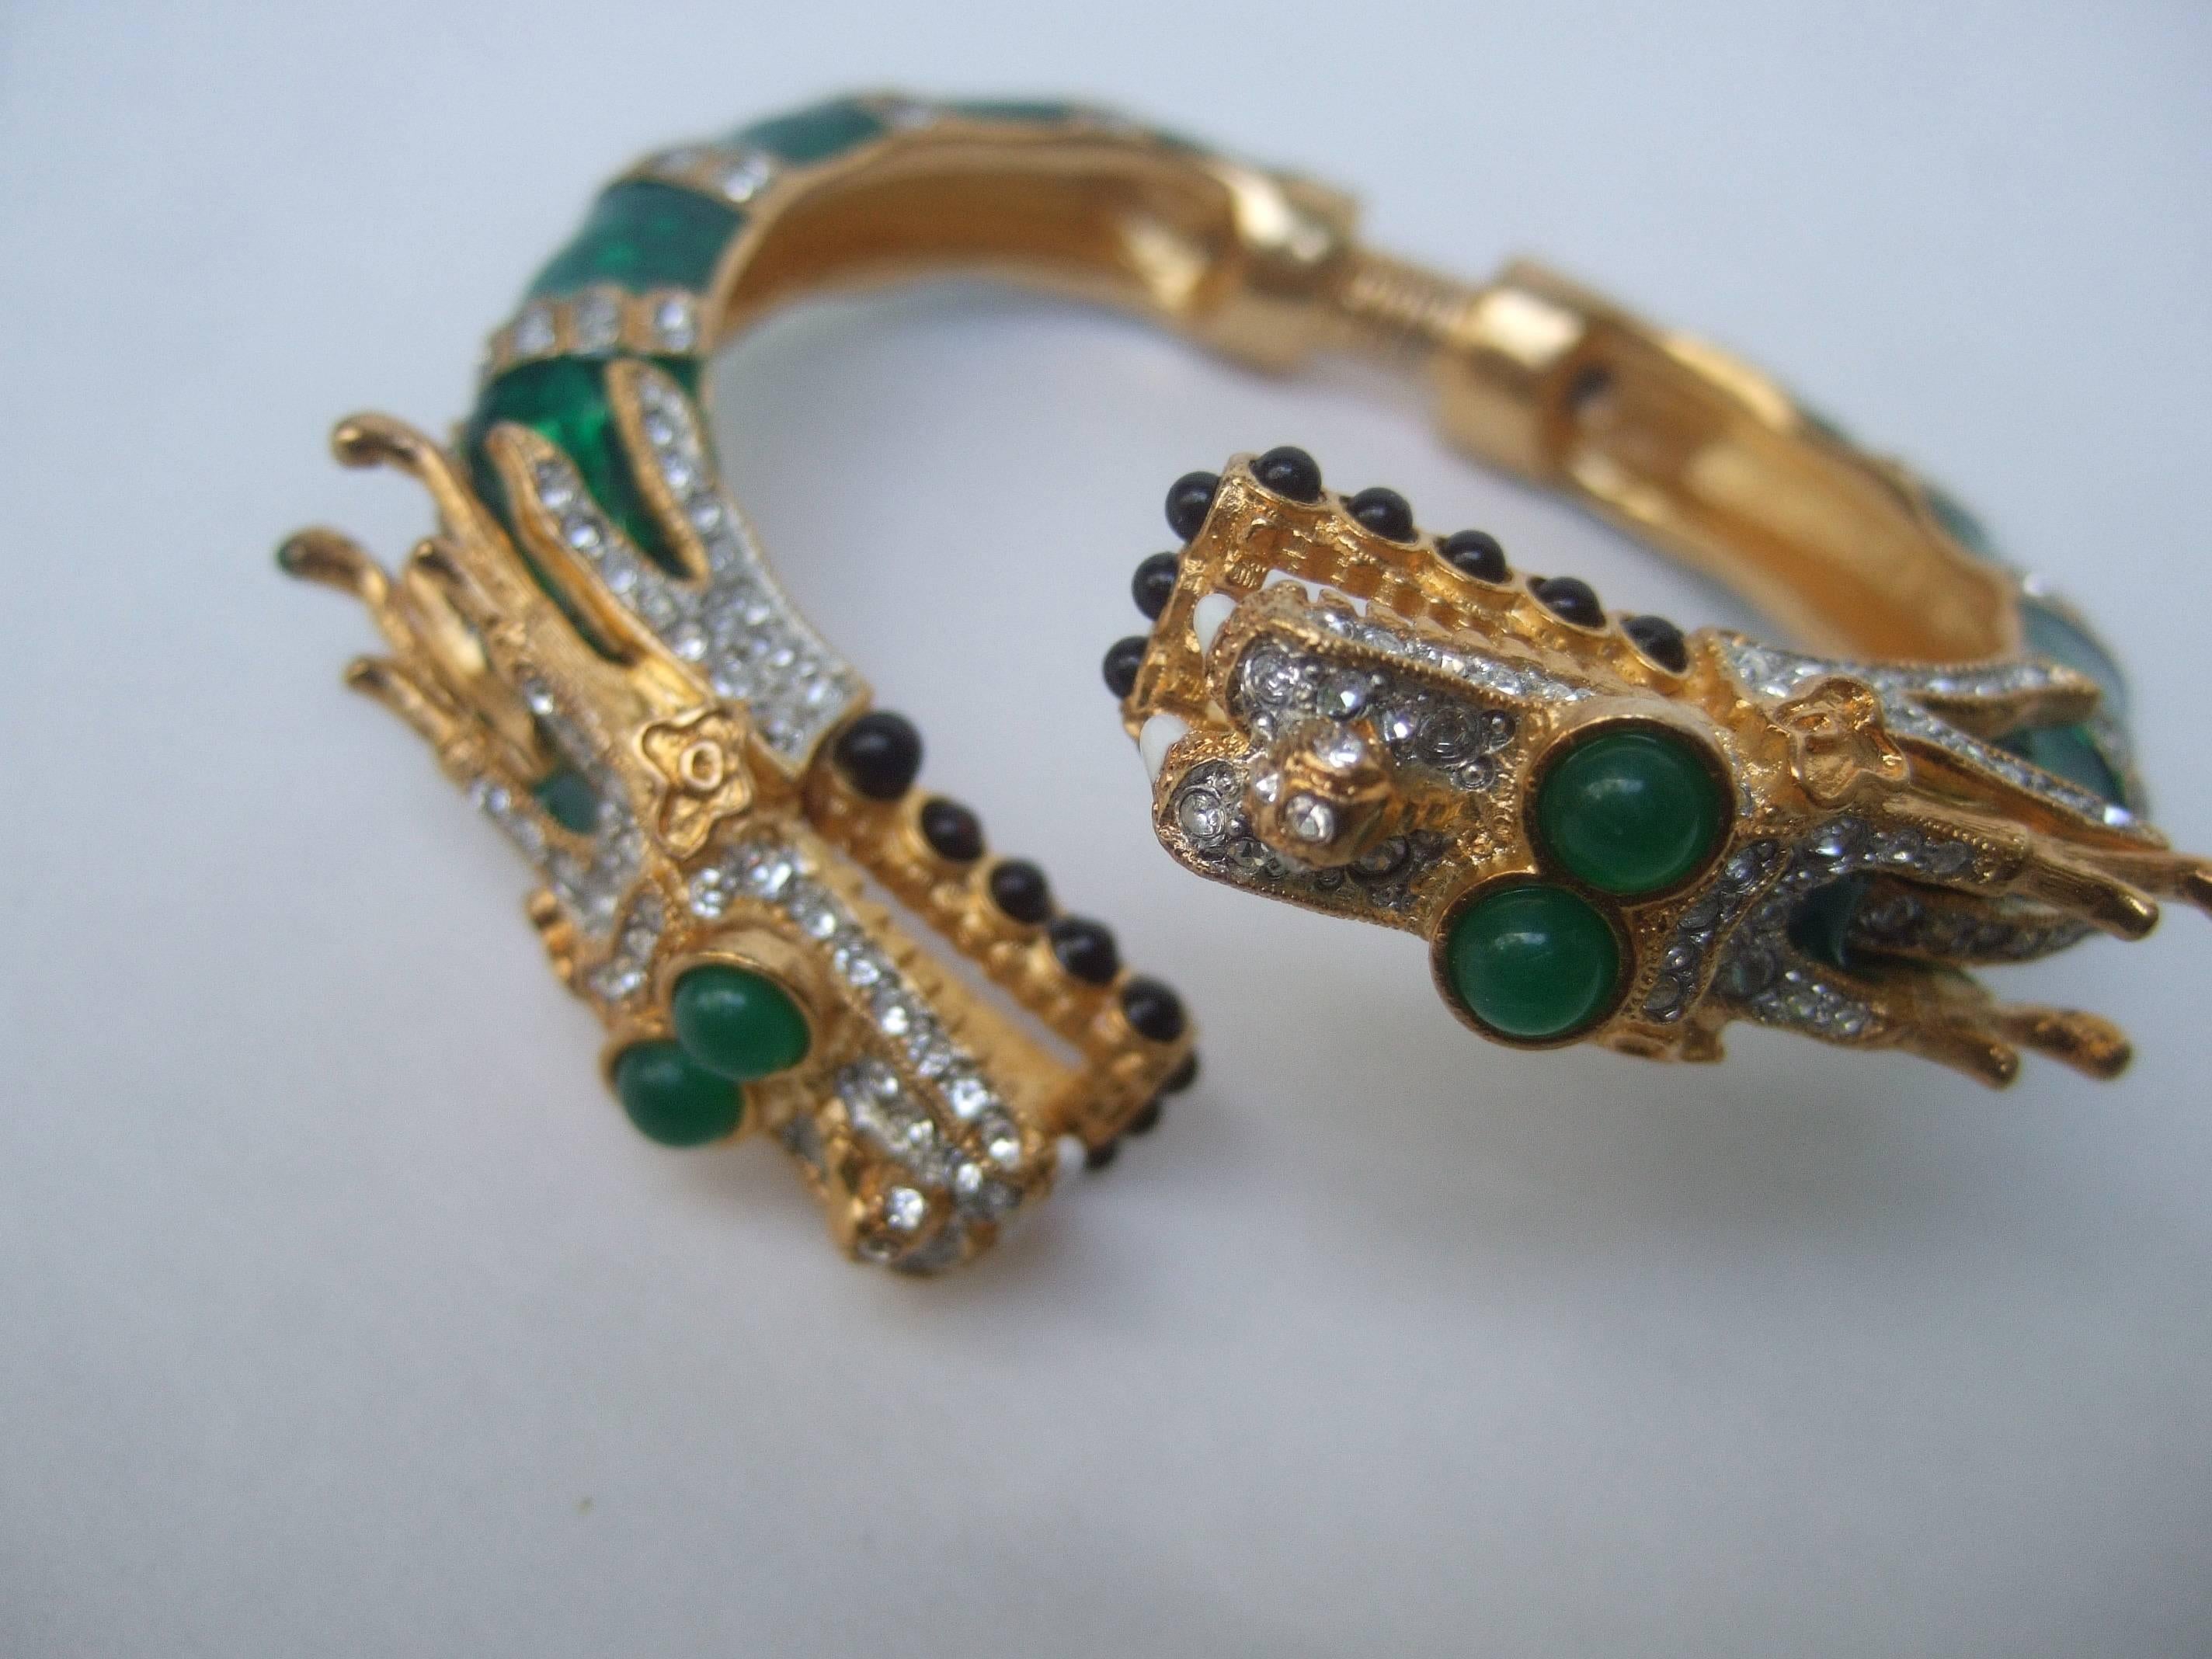 
Ken Lane exotic jeweled enamel dragon bracelet.

This avant-garde designer costume bracelet is designed with a pair of gilt metal jeweled dragon heads.

The dragons are embellished with green resin cabochon eyes accented with diamante crystals